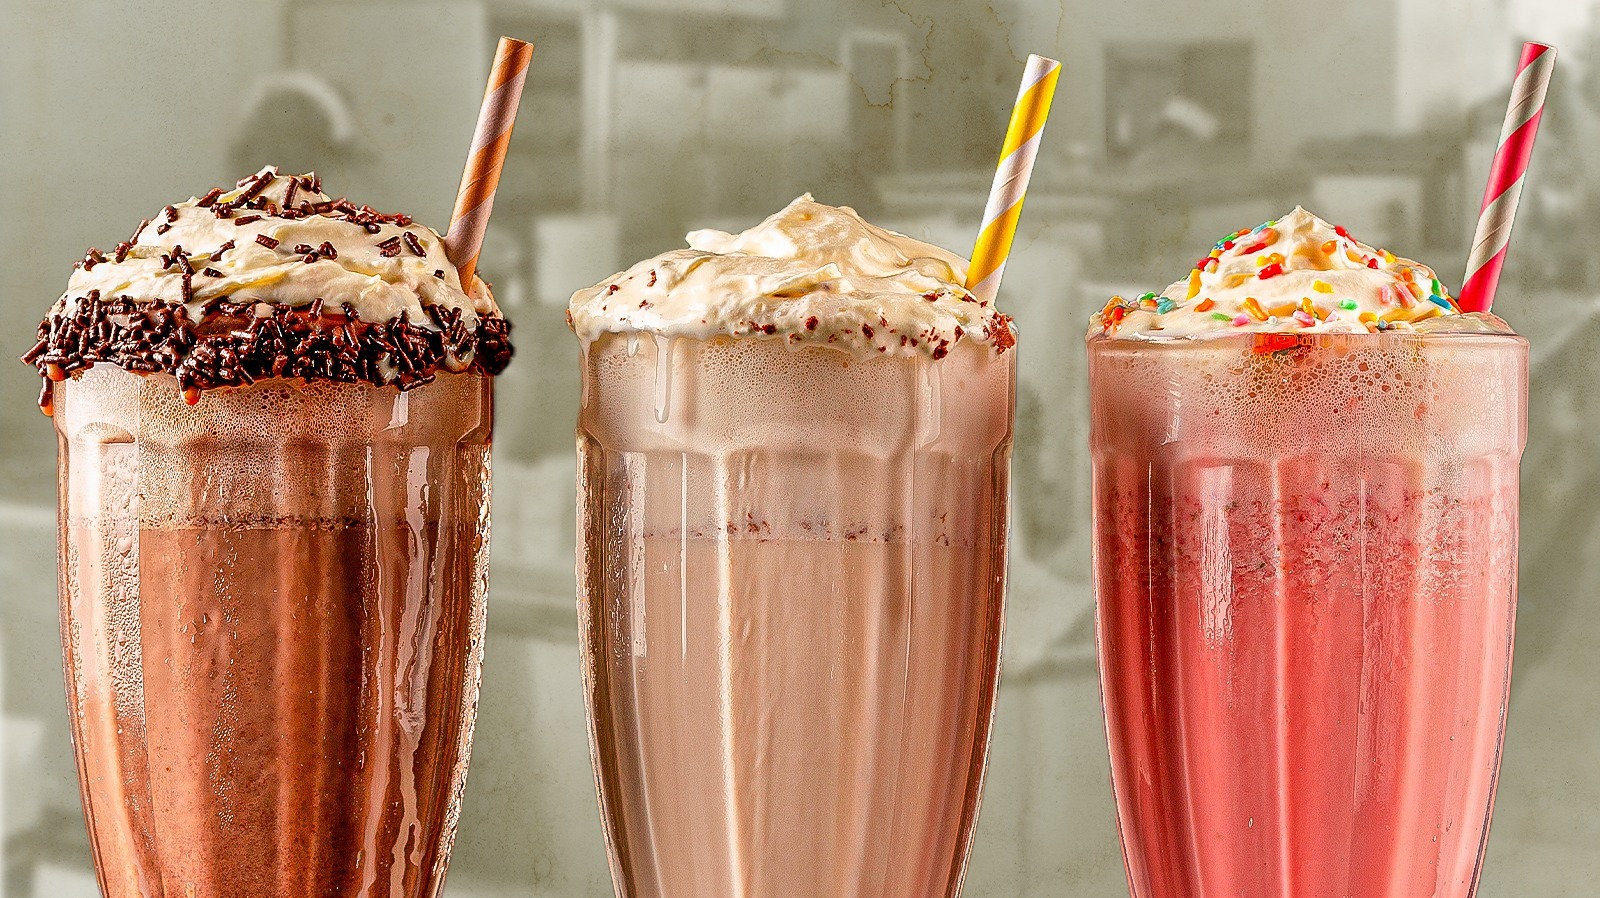 https://www.thedailymeal.com/img/gallery/the-unexpected-health-food-origins-of-the-classic-milkshake/l-intro-1684521447.jpg